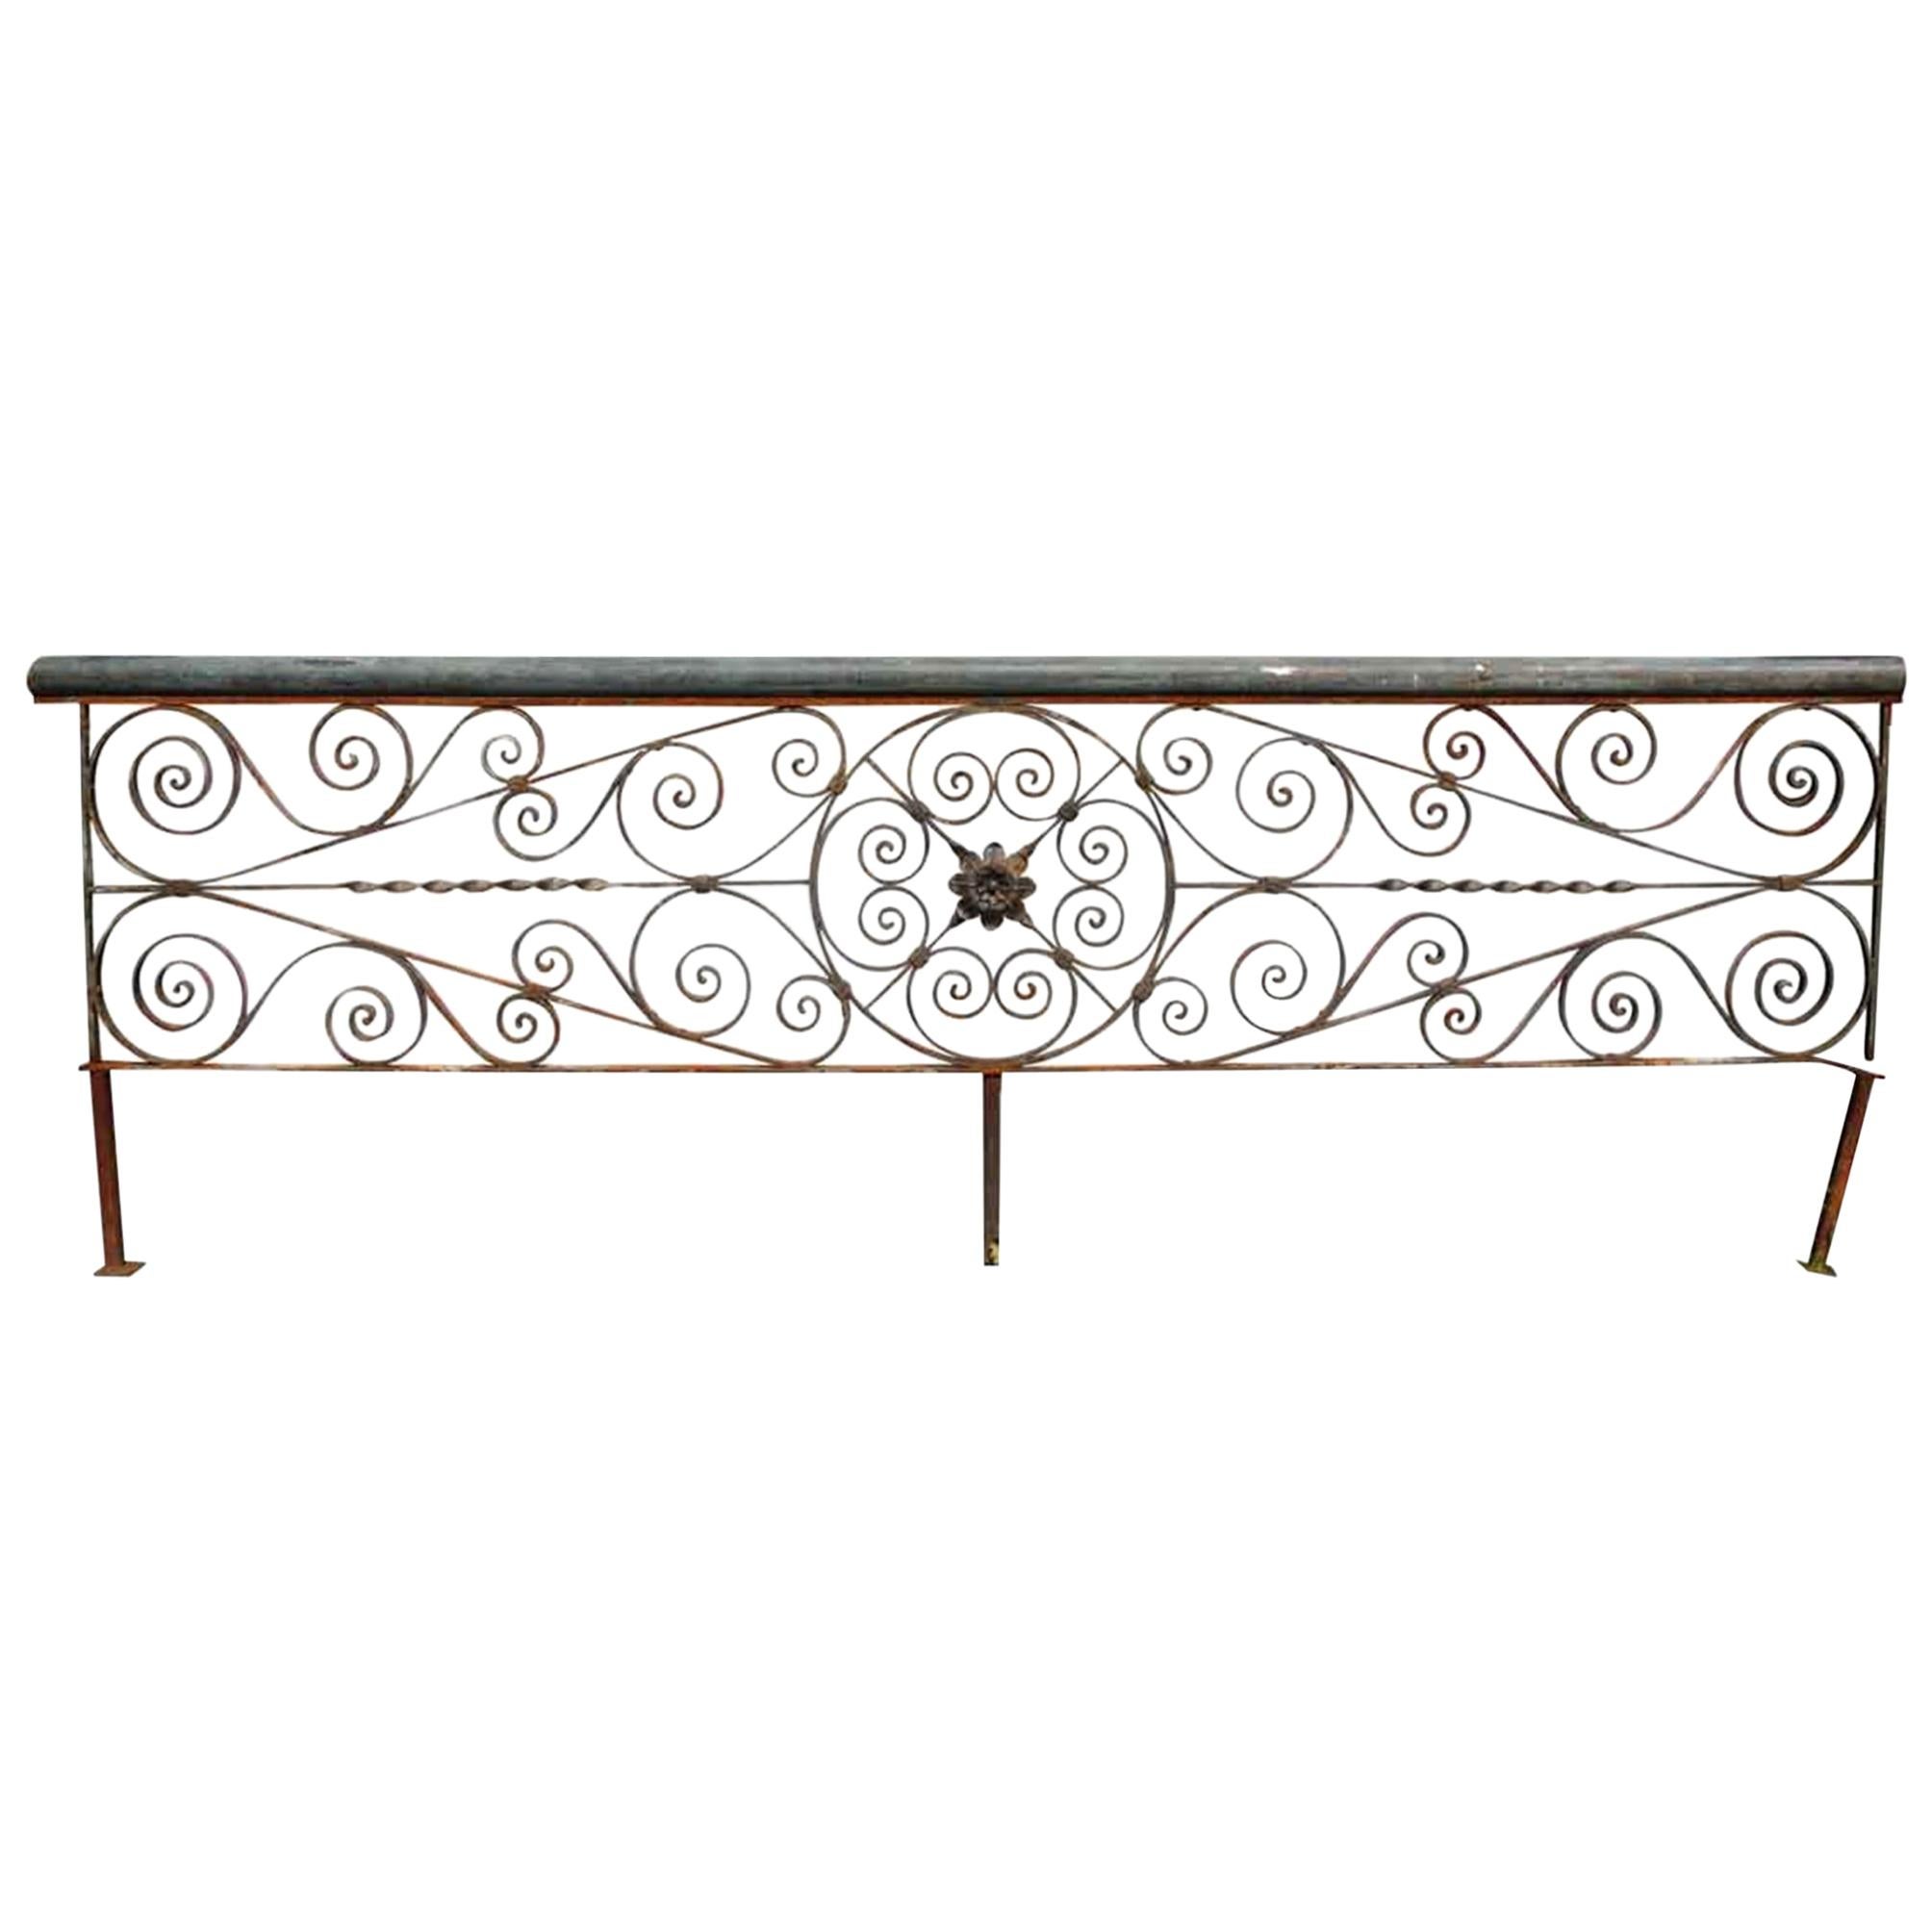 1920s Ornate Hand Wrought Iron Floral Balcony Railing Piece For Sale